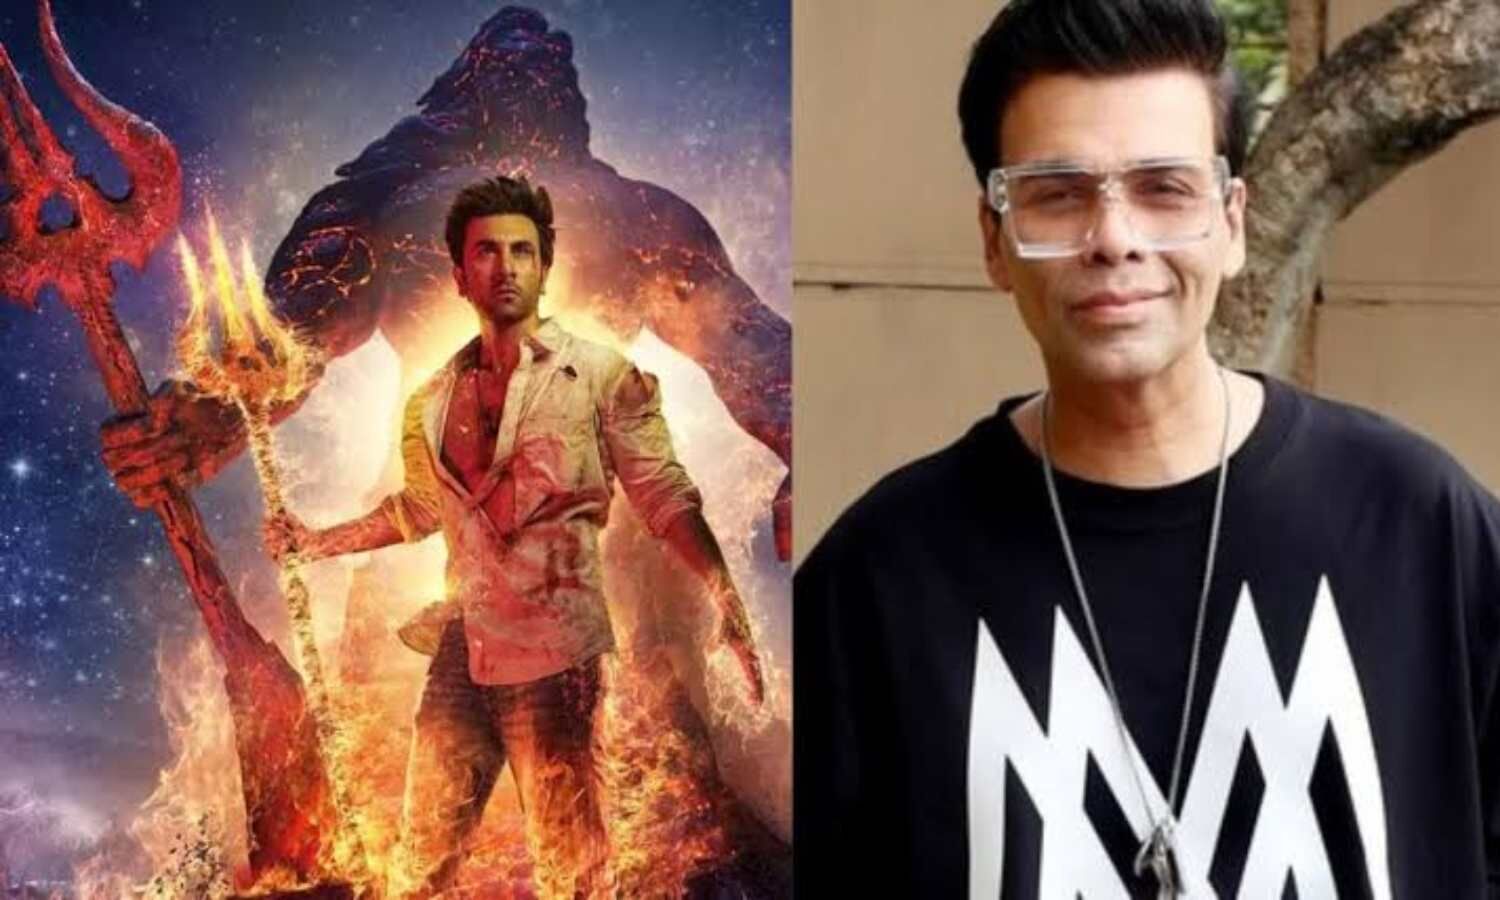 Brahmastra: The ruckus over the film Brahmastra is not stopping, now Karan Johar confronts the troller